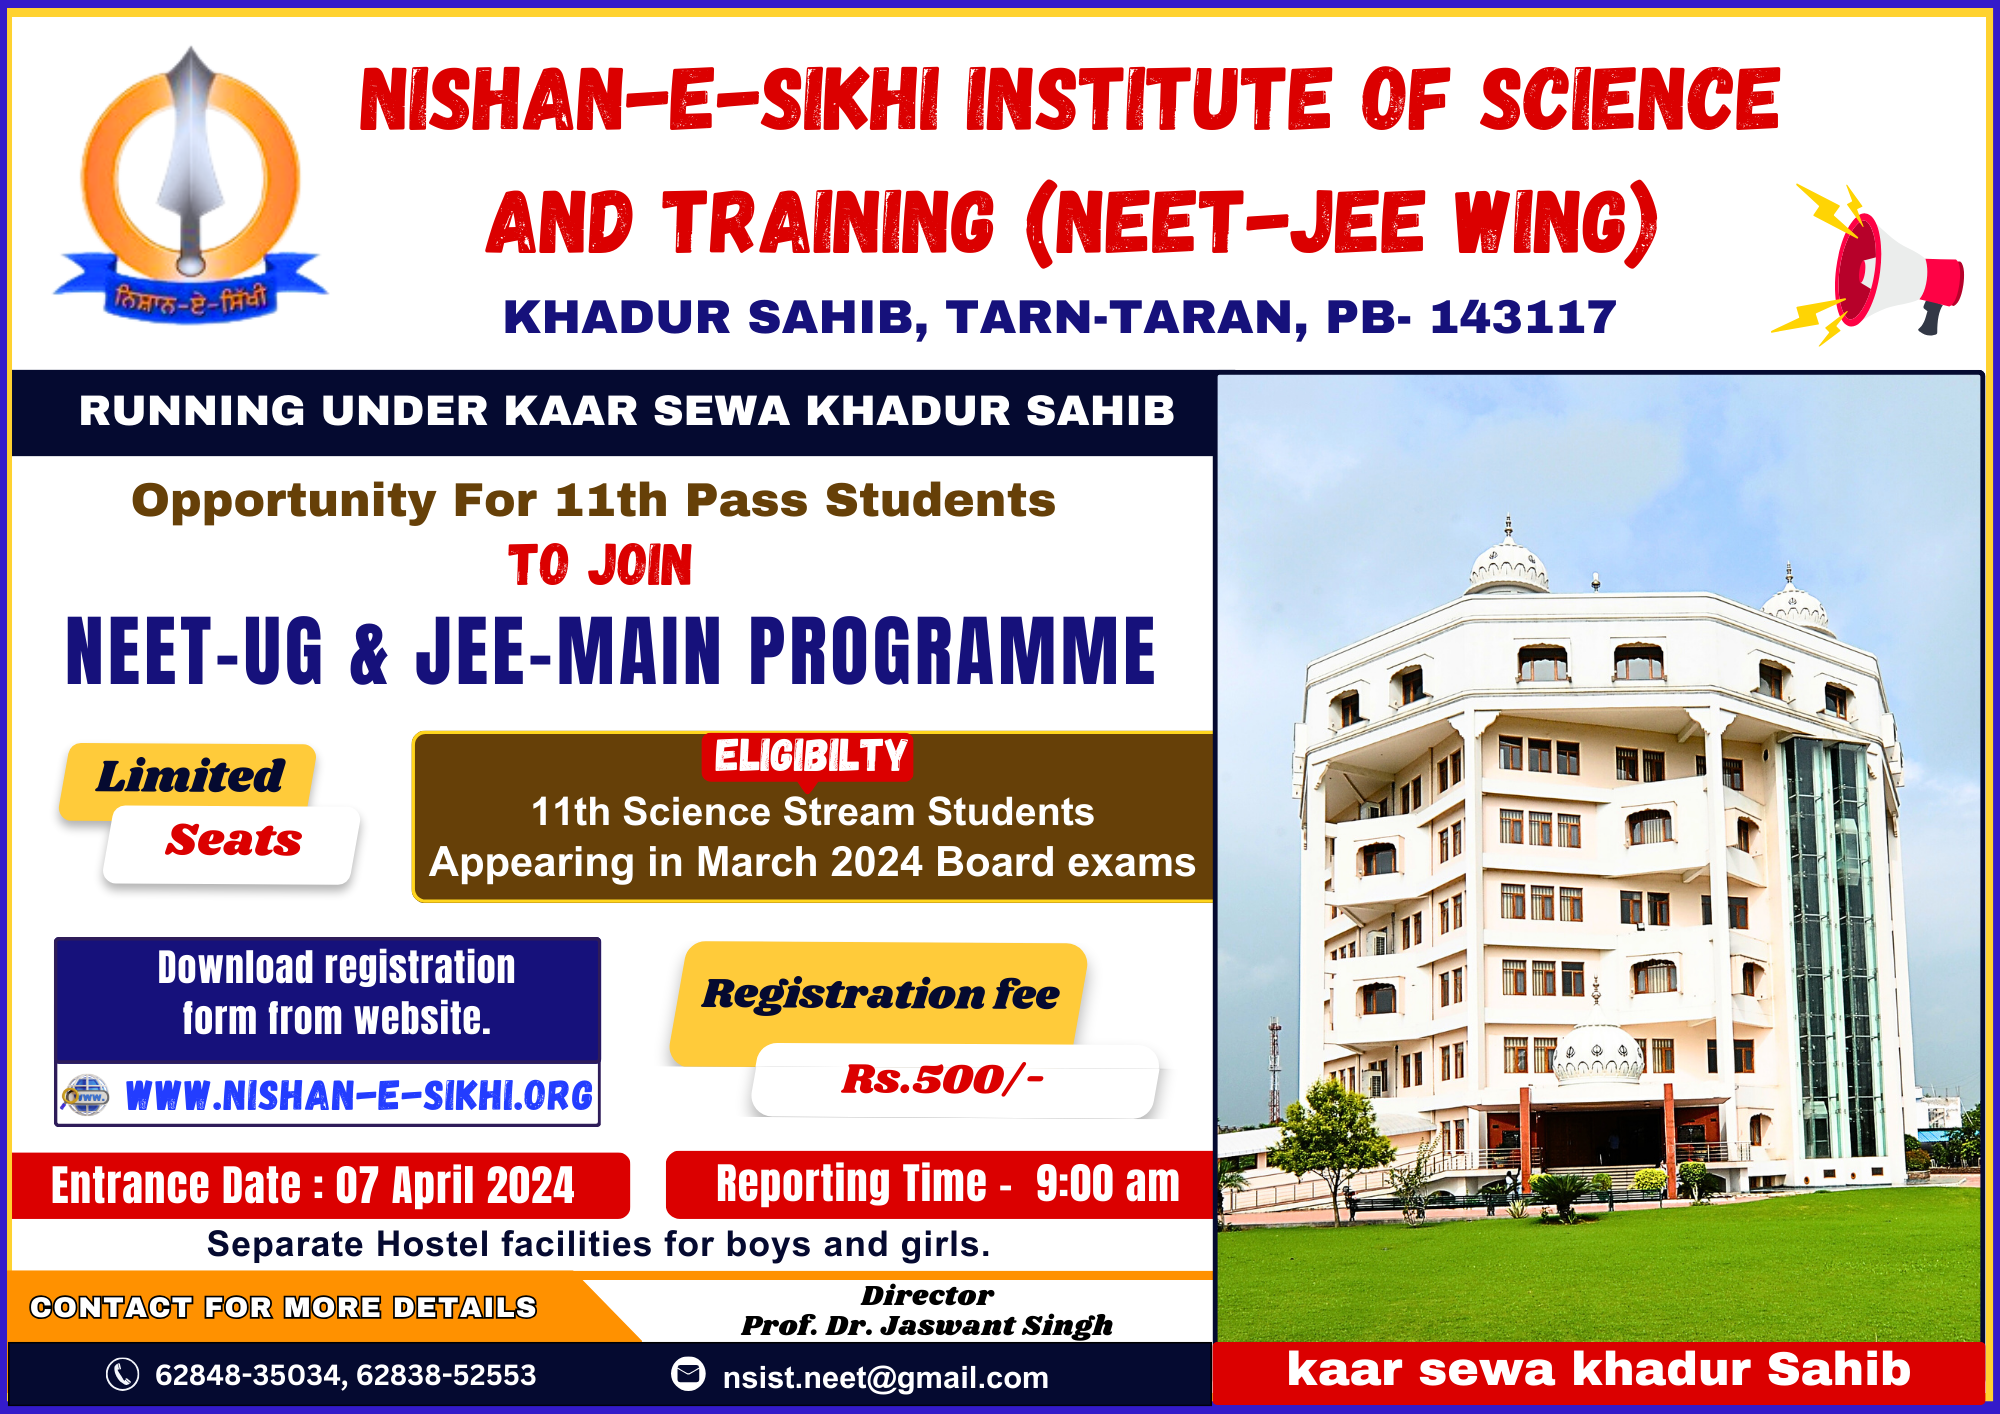 RESULT OF NEET & JEE 07 April 2024 ENTRANCE TEST (SELECTED STUDENTS)